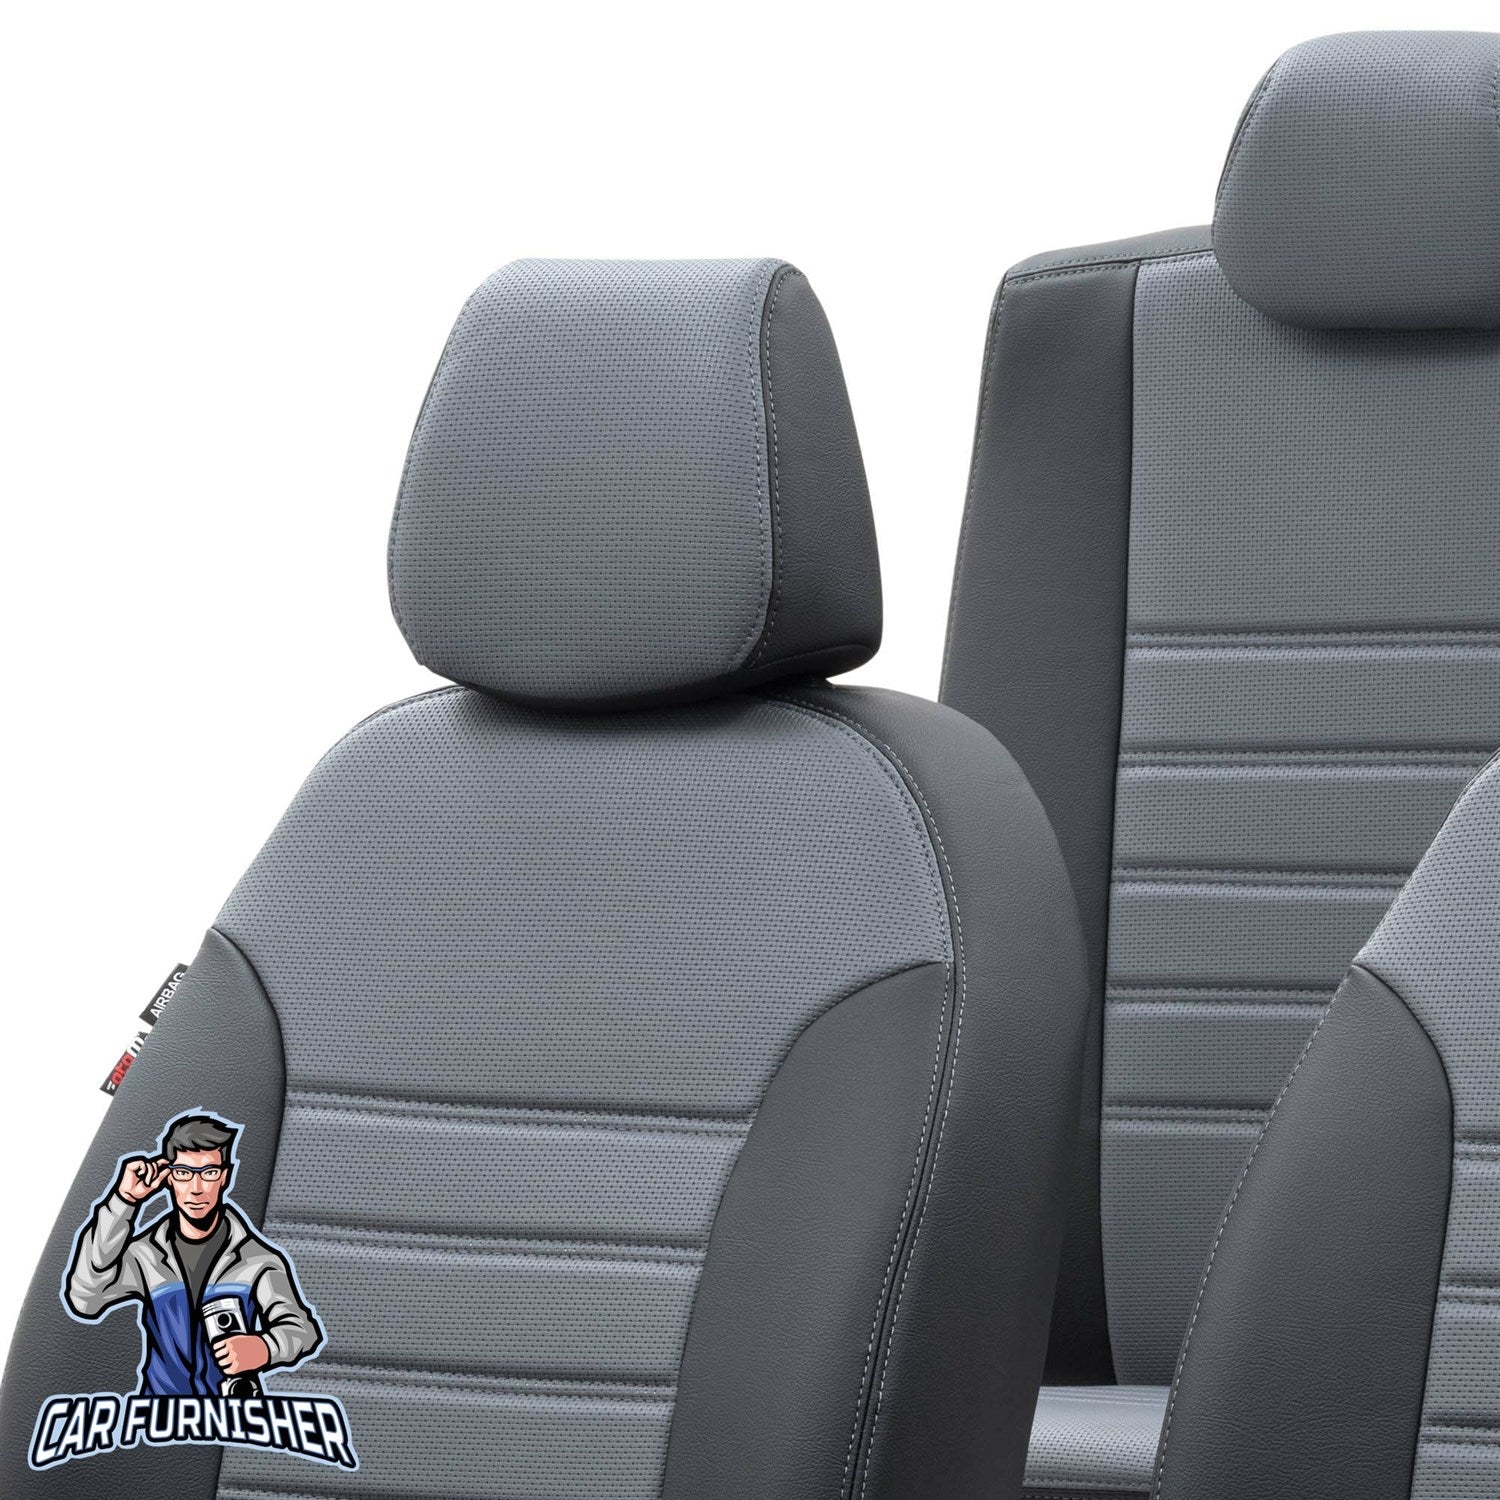 Volvo V40 Seat Cover New York Leather Design Smoked Black Leather